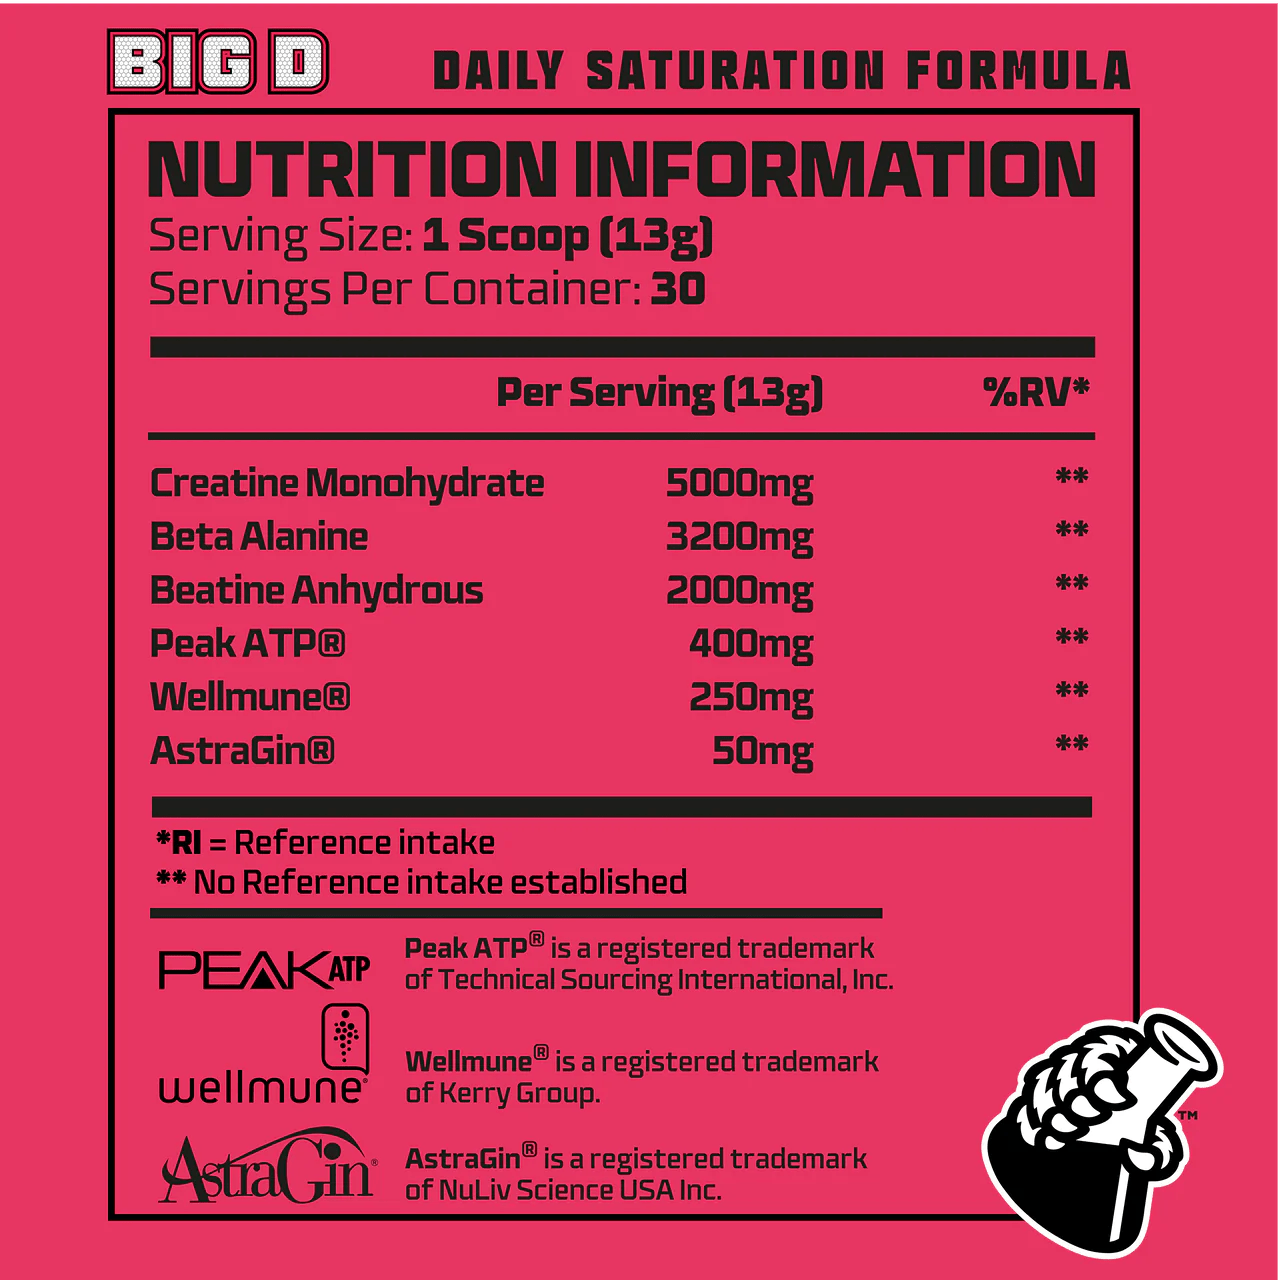 Beast PharmBig DBig D Daily Saturation FormulaRED SUPPS